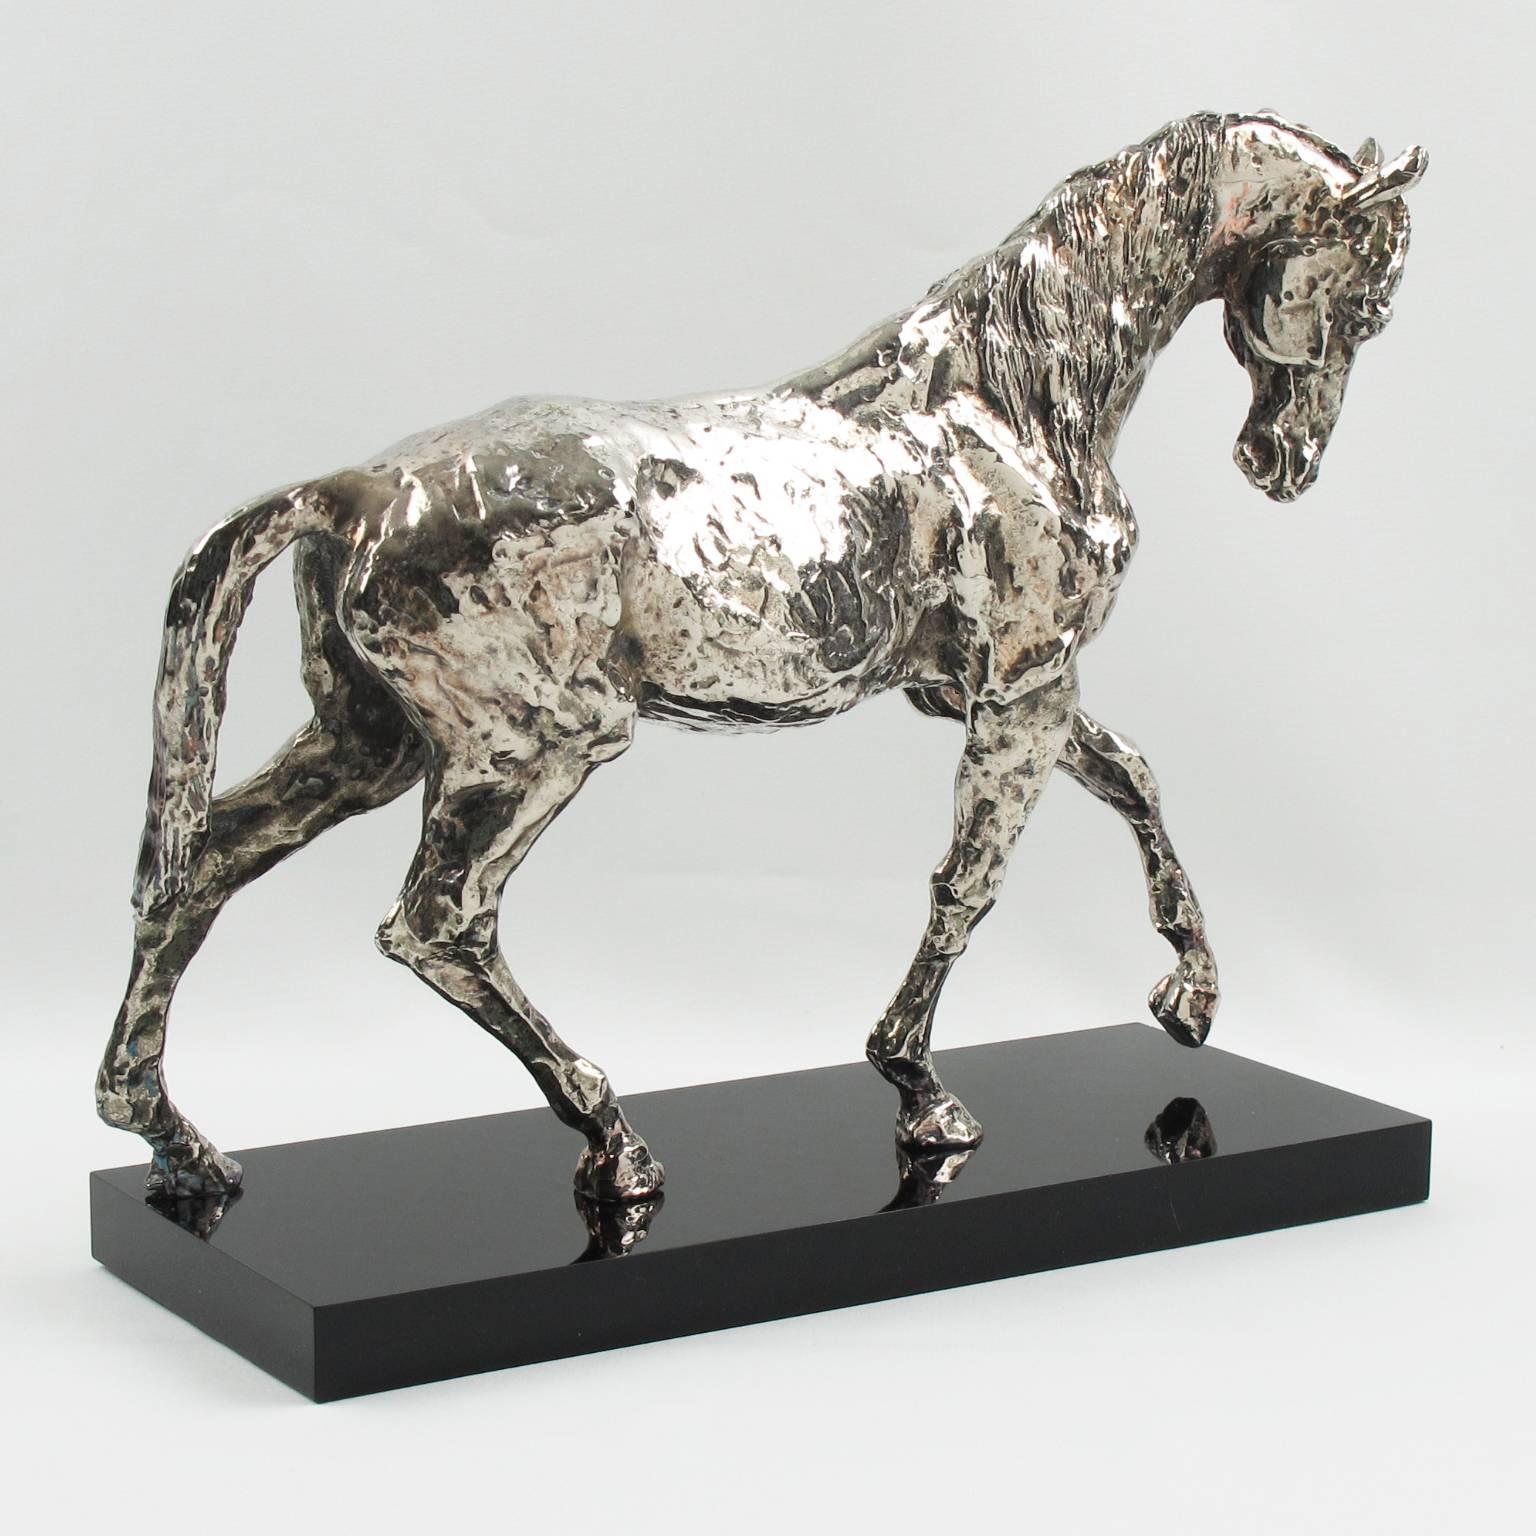 Rare silvered metal horse sculpture mounted on a black Lucite, acrylic thick plinth. Heavy quality with finely detailed carving and hand-made feel finish. Europe, circa mid 20th century.

Measurements: 11.82 in. wide (30 cm) x 4.75 in. deep (12